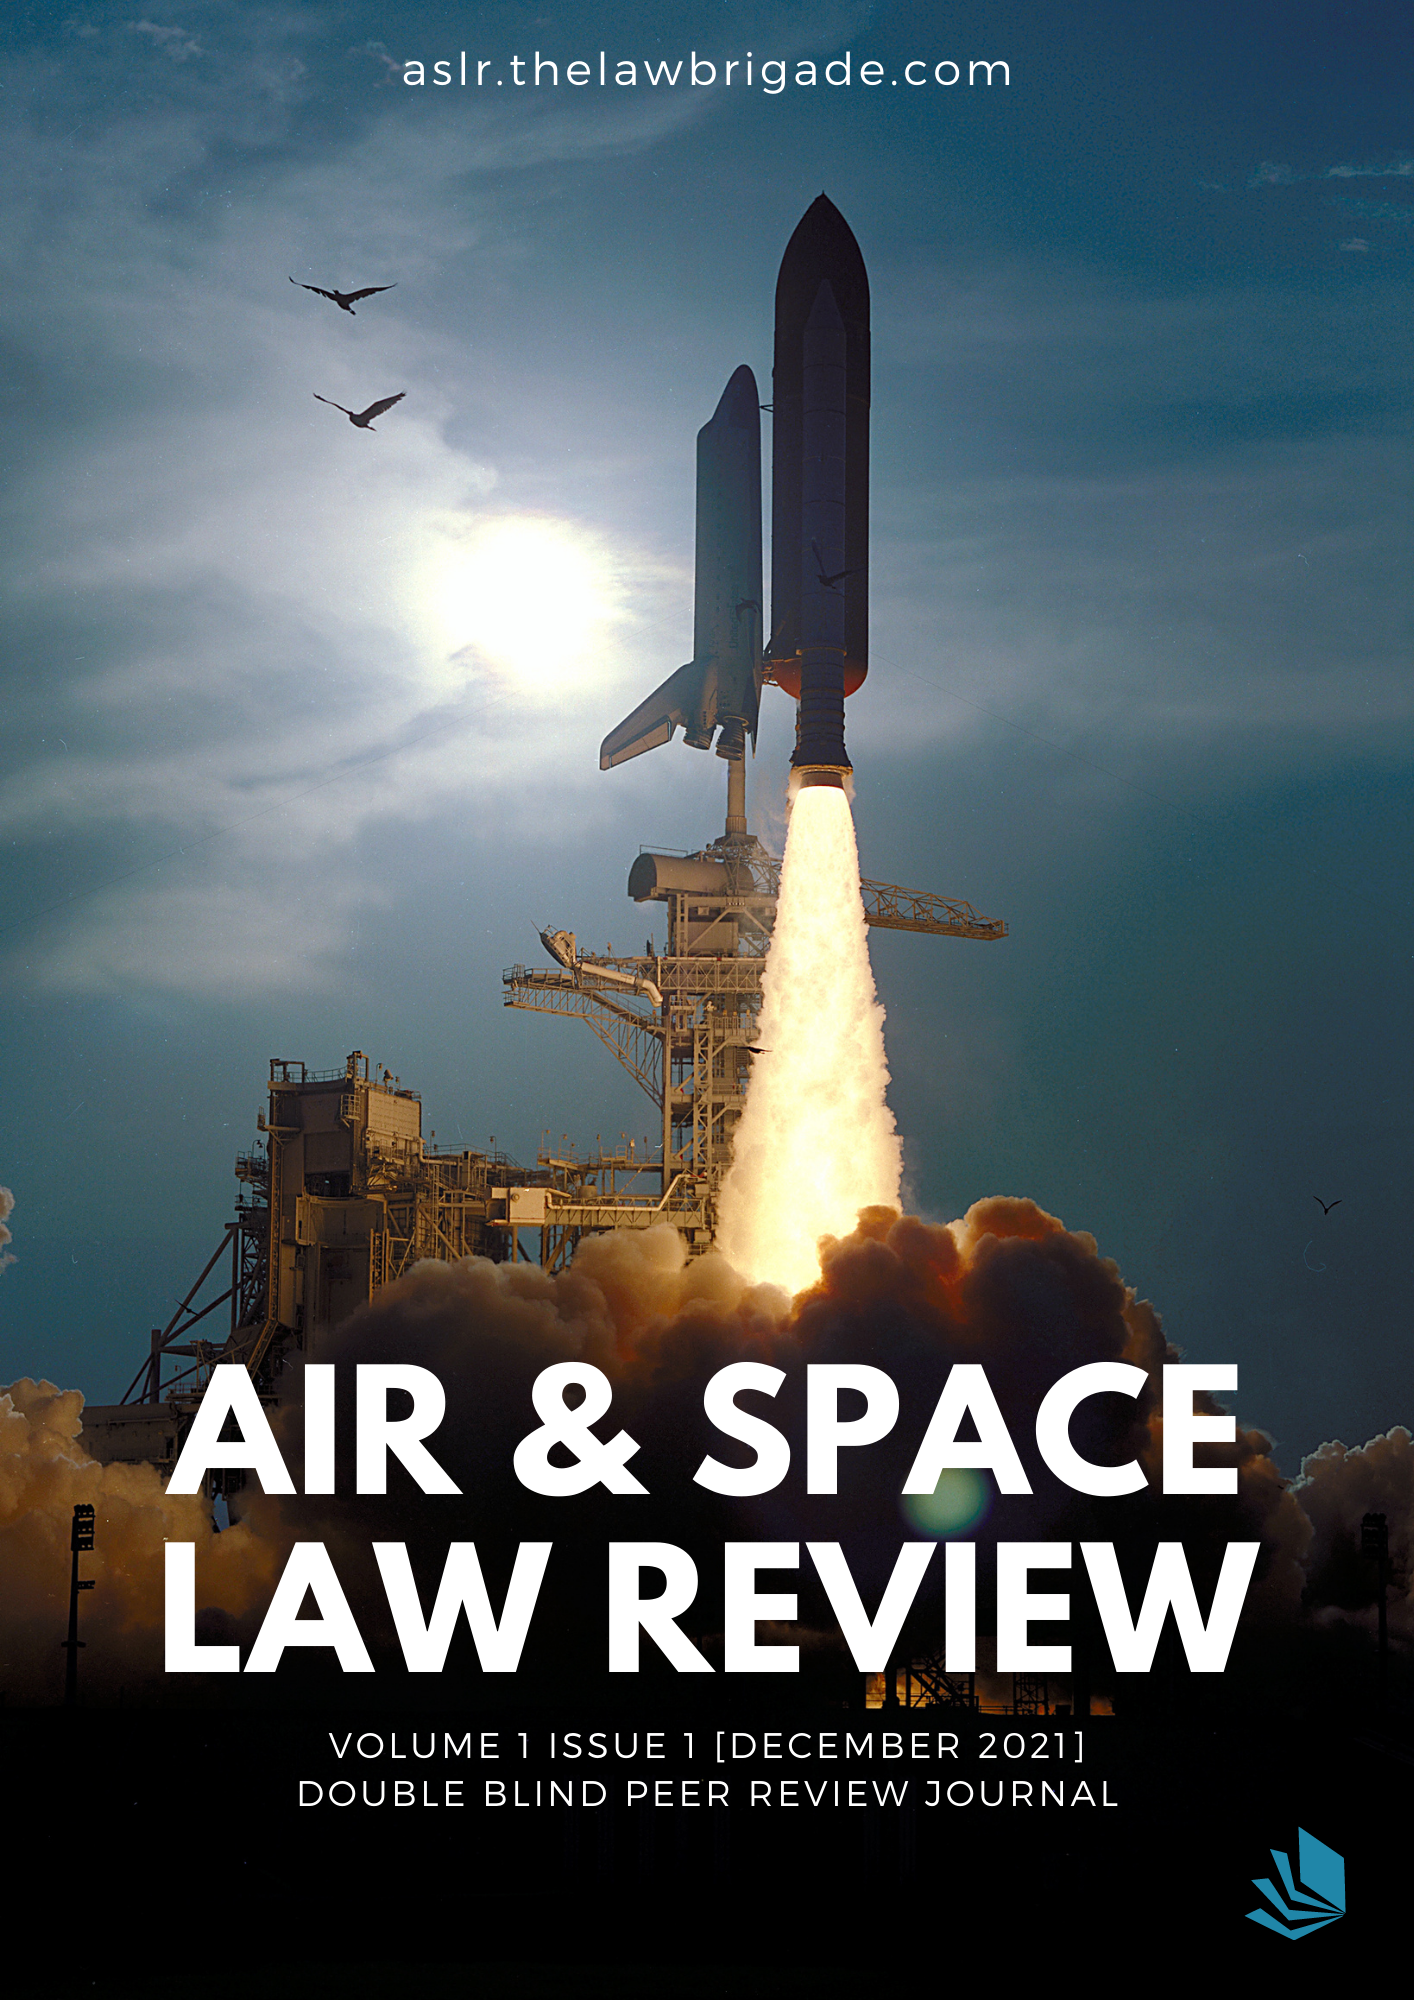 Air & Space Law Review